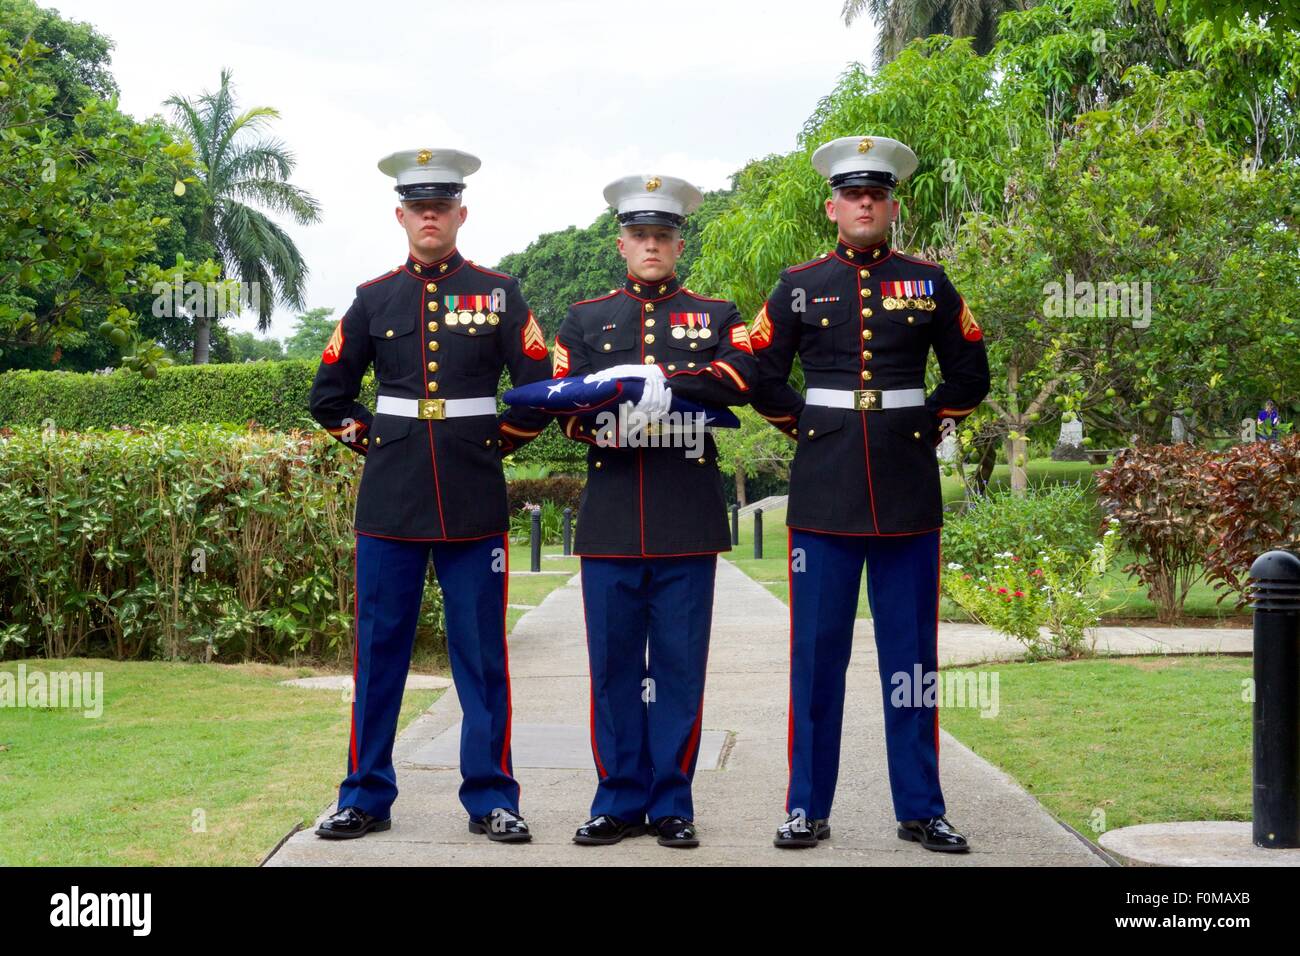 U.S. Marines stand ready to raise the flag during a ceremony at the Ambassador's residence August 14, 2015 in Havana, Cuba. The United States reopened the embassy in Cuba for the first time since 1961. Stock Photo